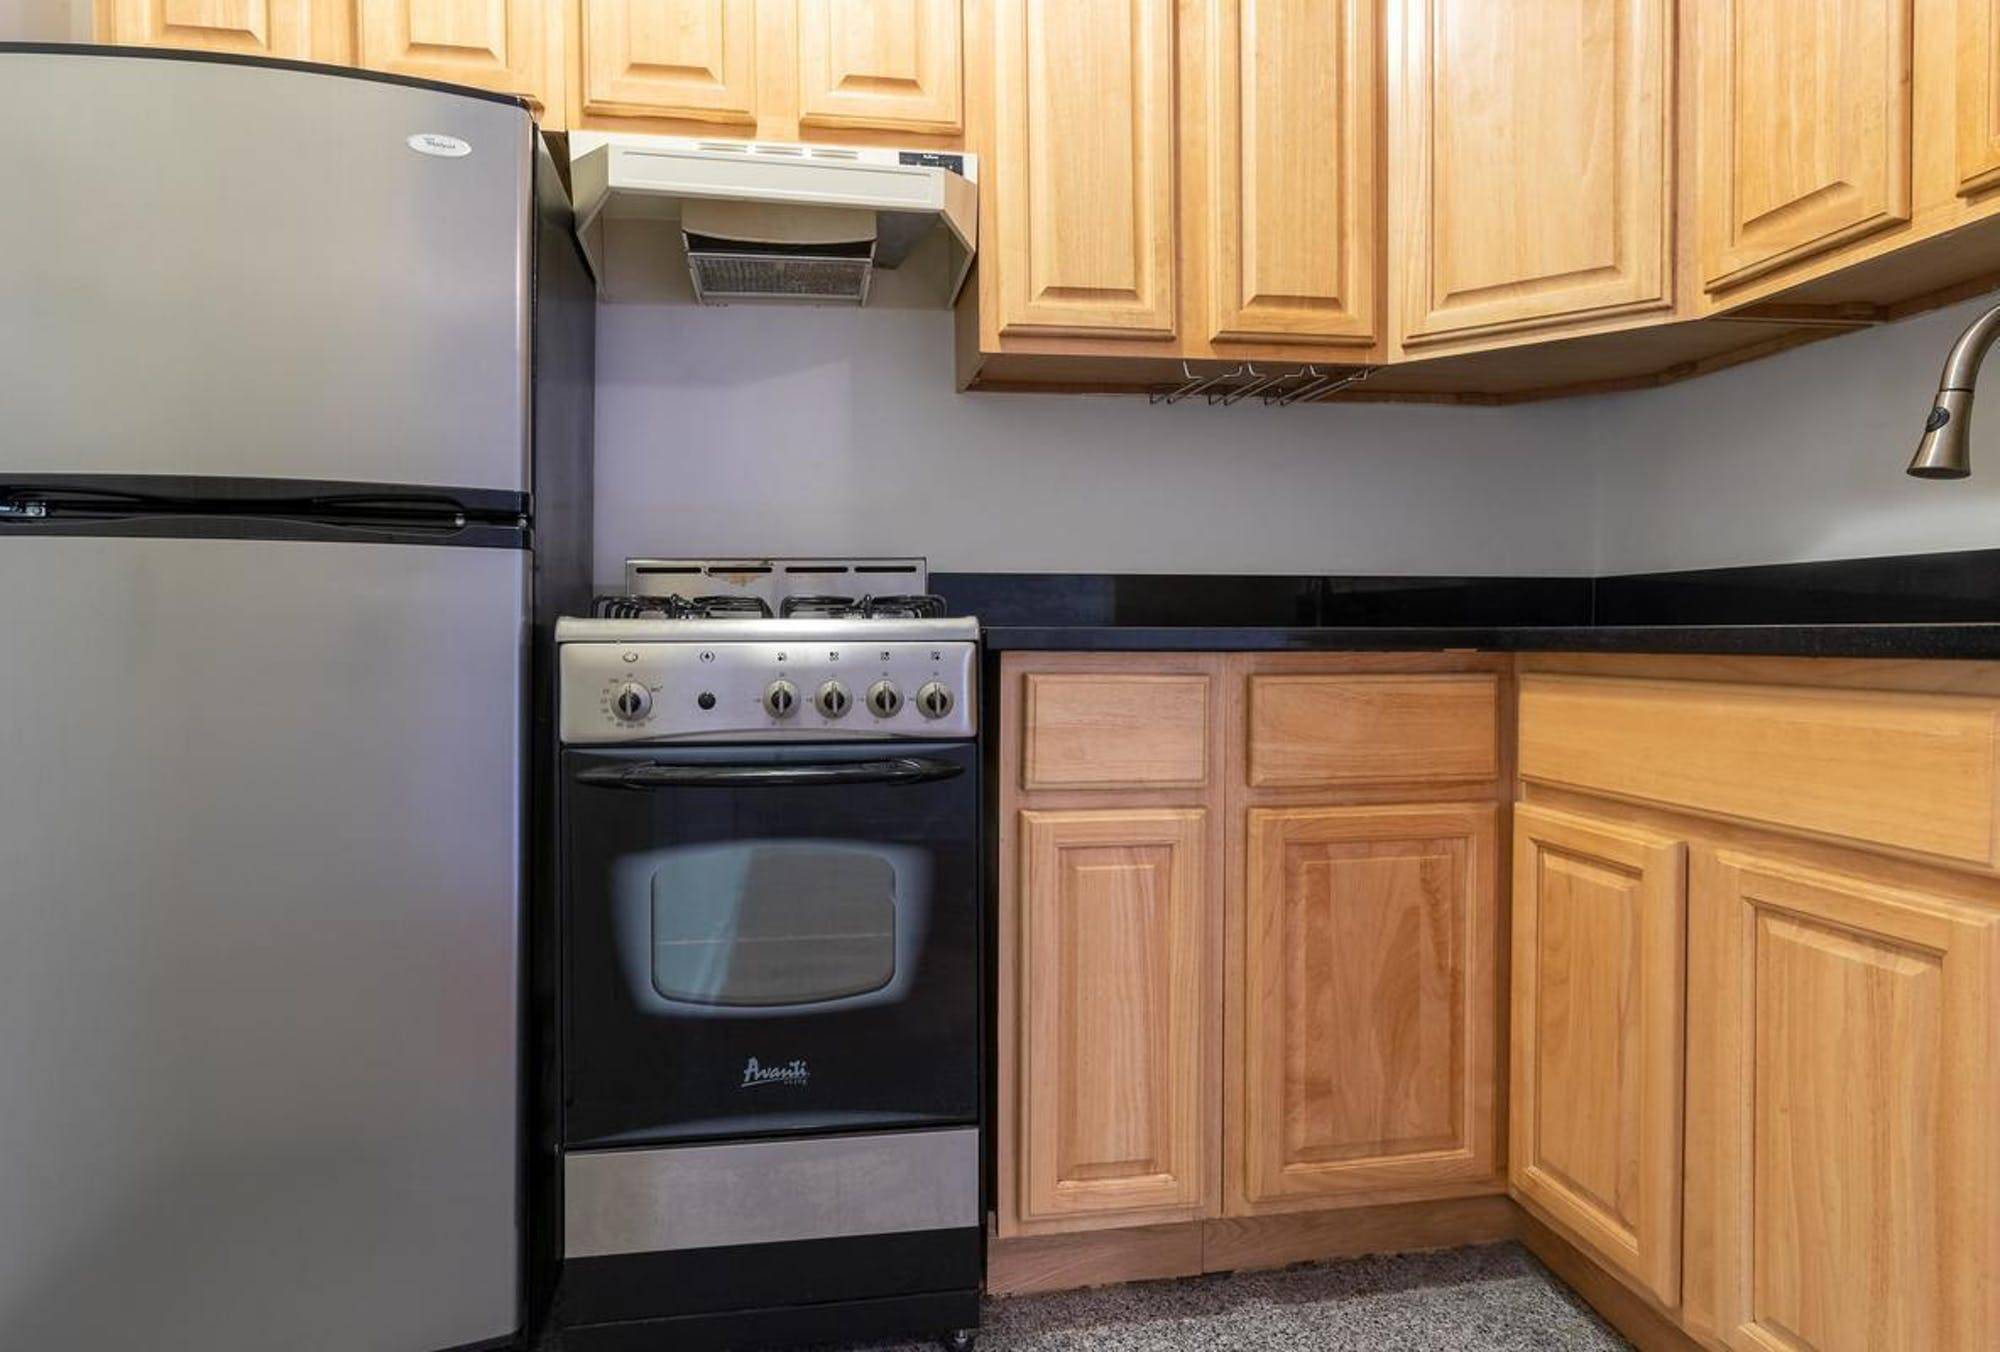 Brand New Listing ! Gut Renovated Studio Apartment Details Renovated Kitchen Bathroom Wide Plank Hardwood Floors Functional Floor plan Kitchen Features Top of the Line Stainless Steel Appliances Refrigerator, Oven ...